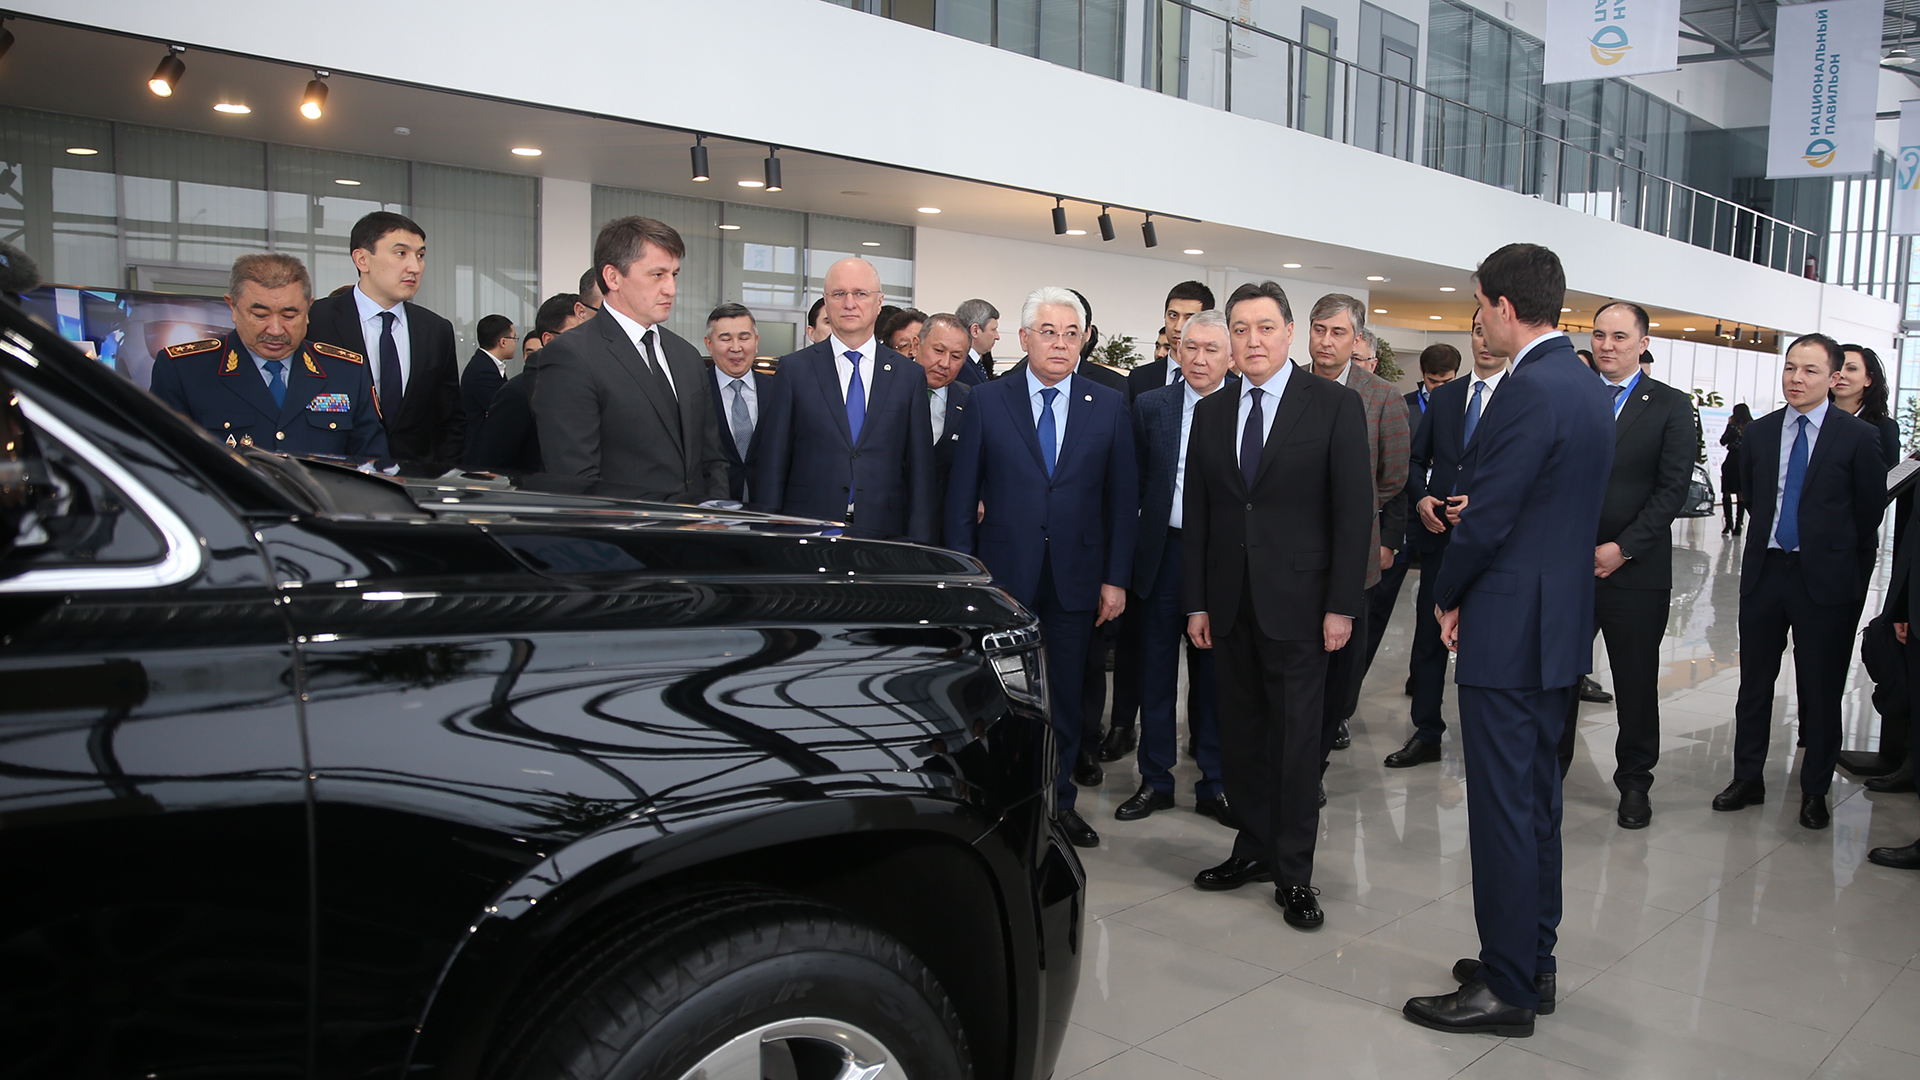 Prime-minister informed about plans for developing automotive industry in Kazakhstan